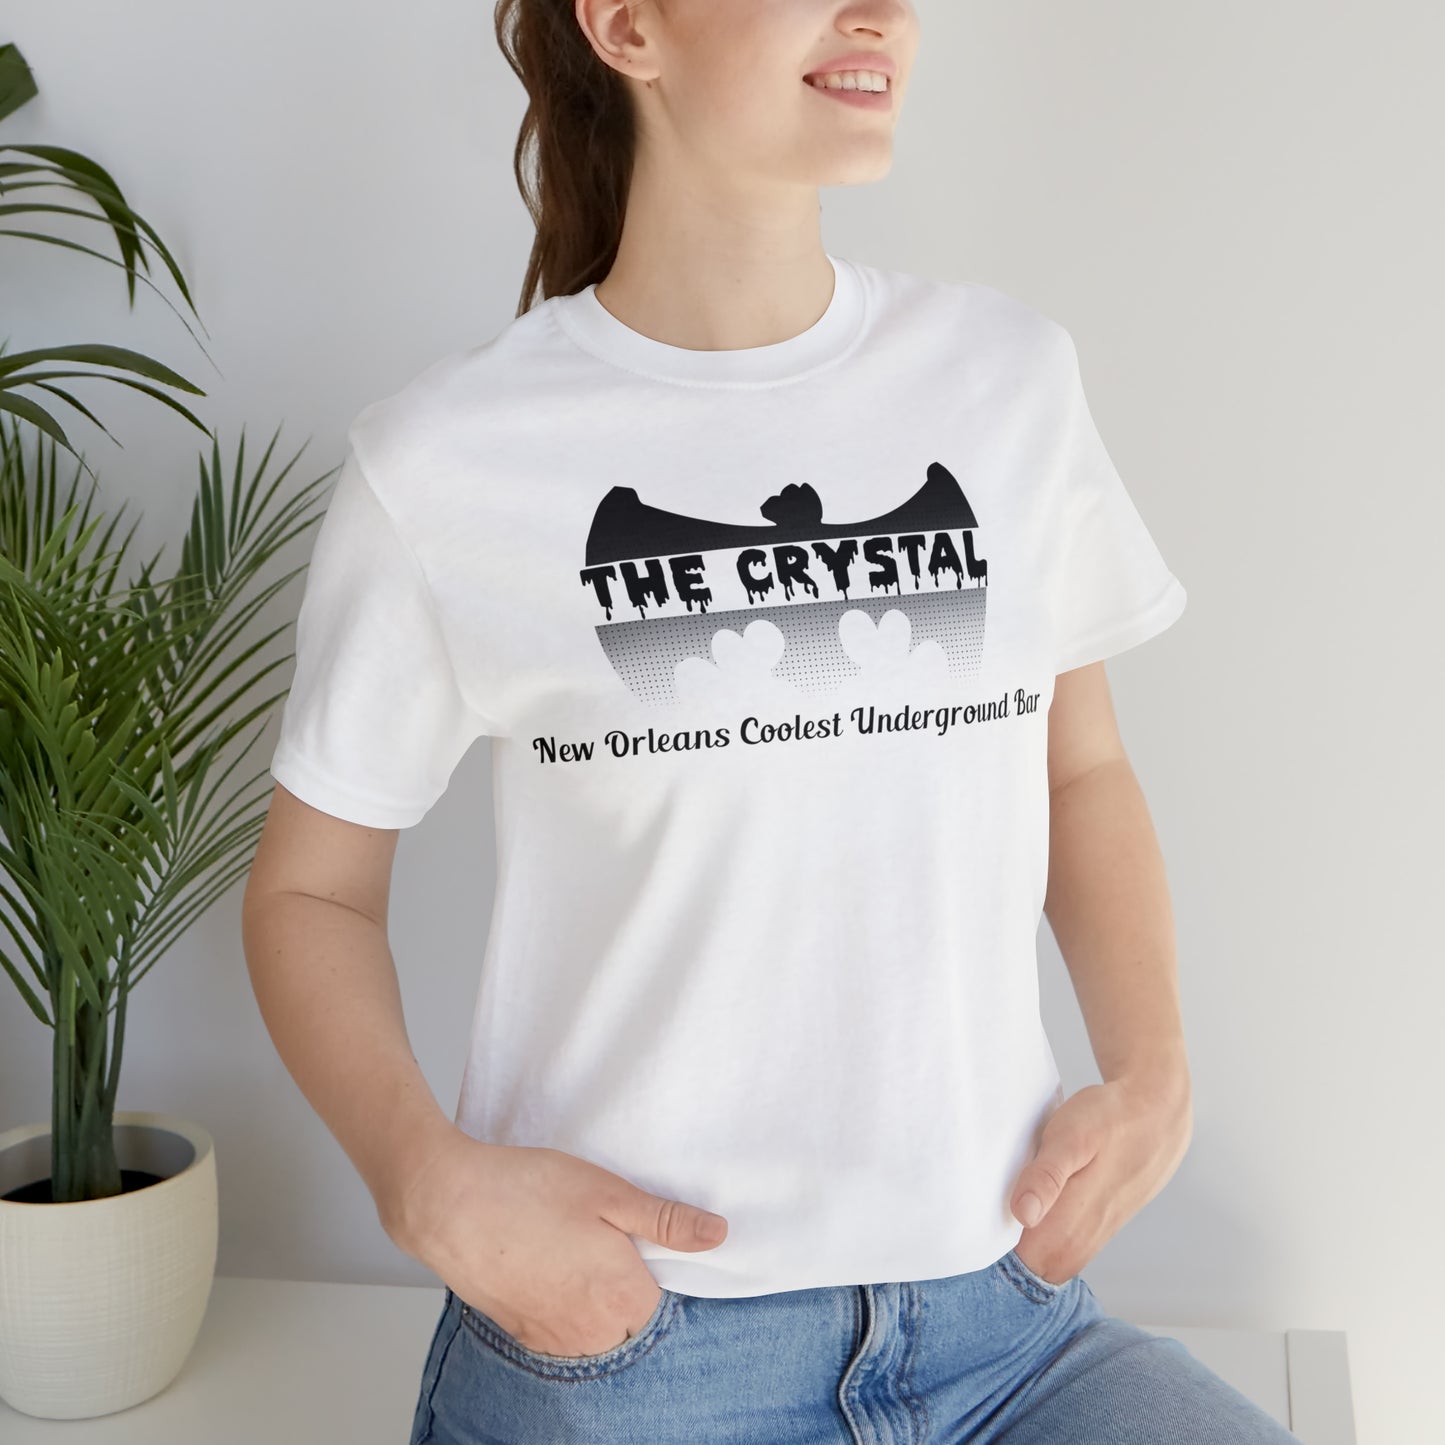 The Blue Crystal New Orleans Coolest Underground Bar Shirt